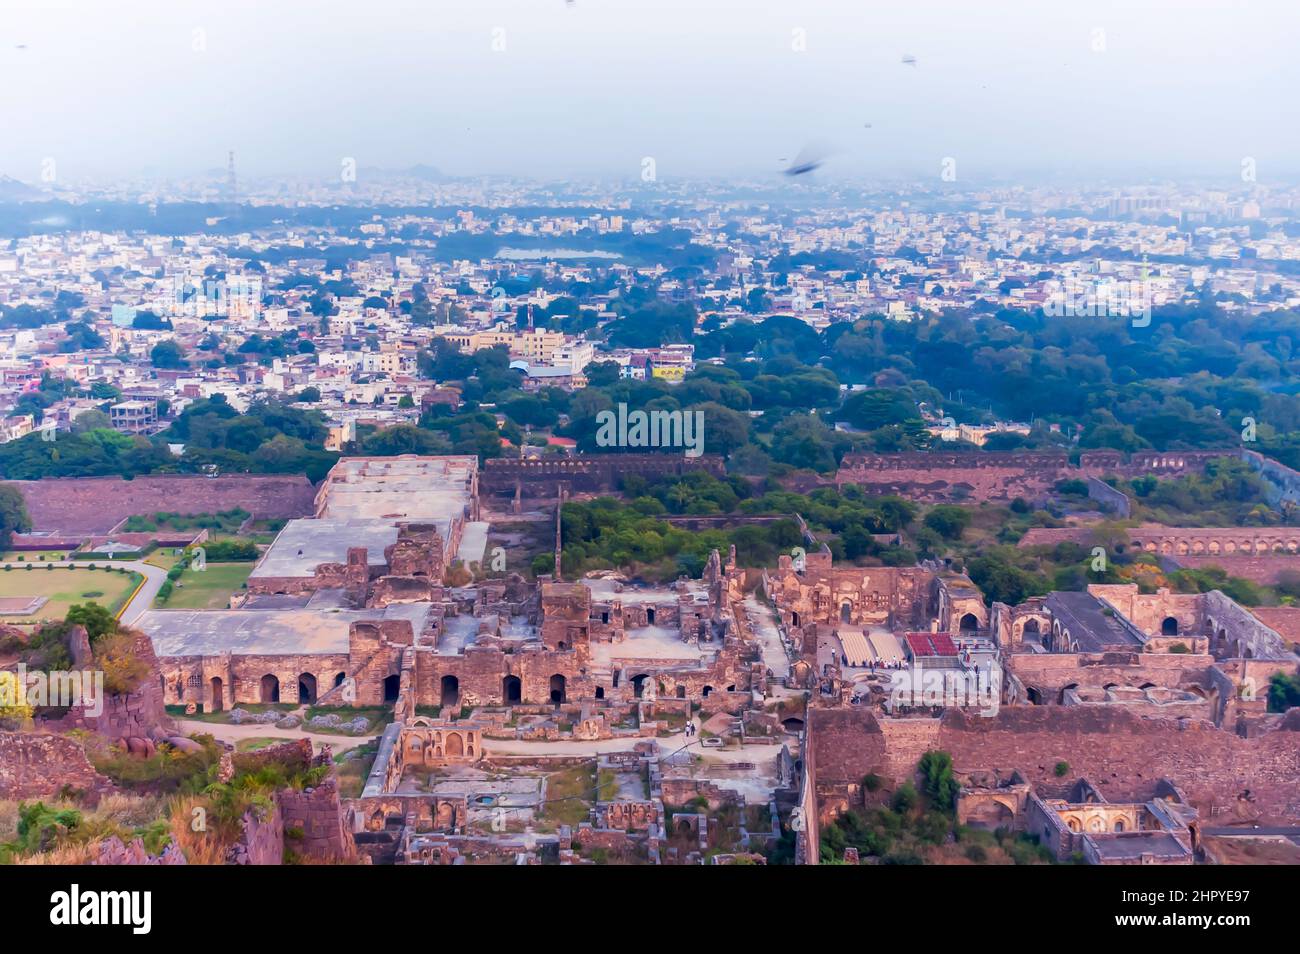 A view of the inside of the Golconda Fort in Hyderabad, Telangana, India. The skyline of the city with a layer of smog is visible in the background. Stock Photo